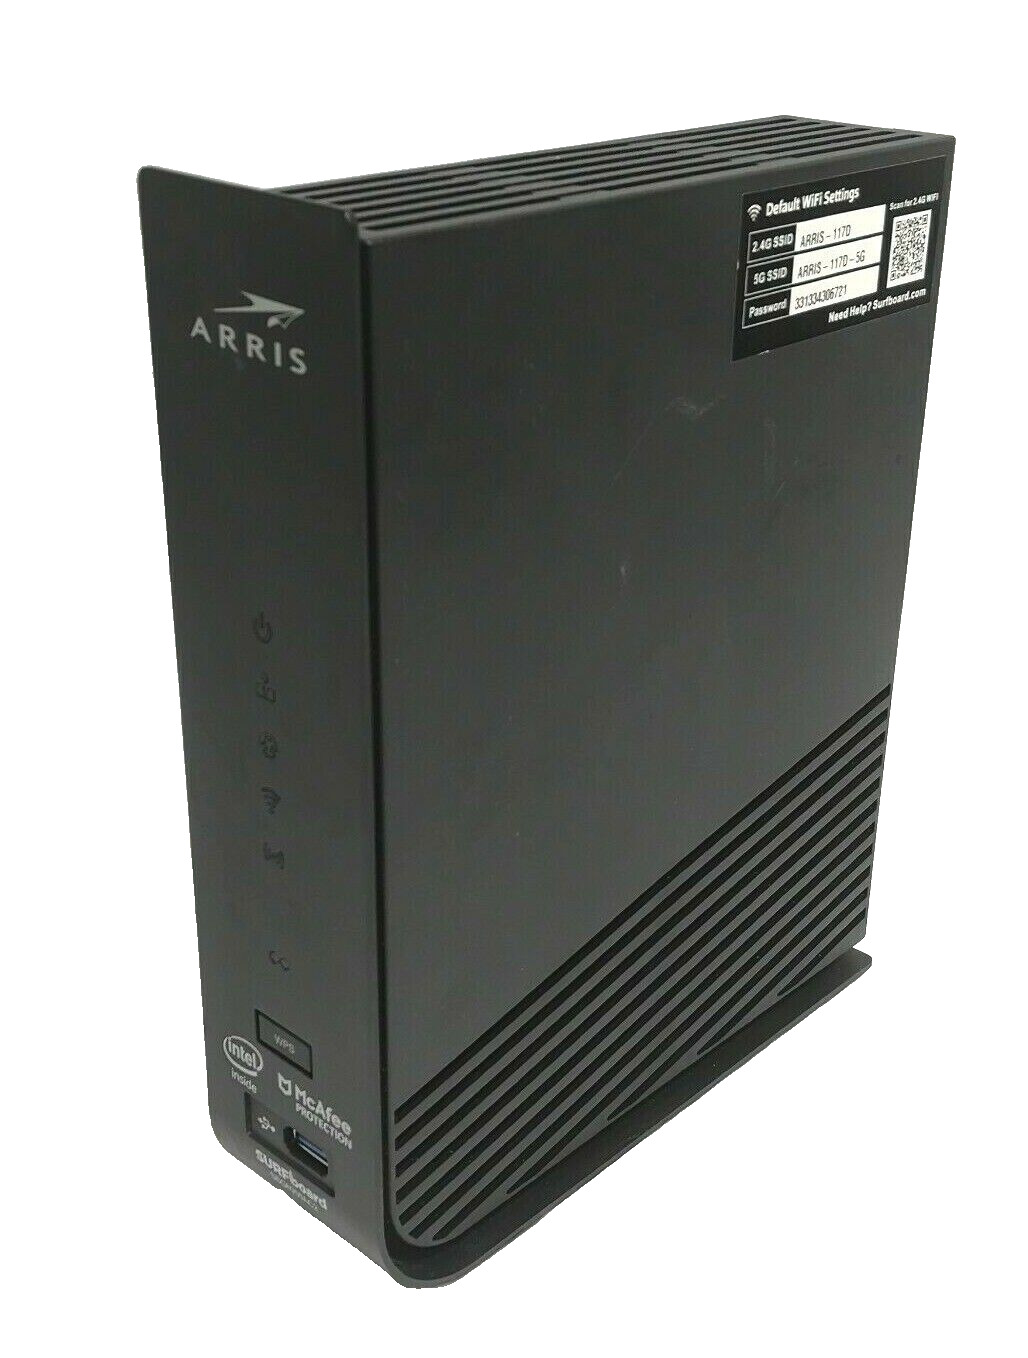 ARRIS Surfboard SBG6950AC2 Cable Modem & Wi-fi Router